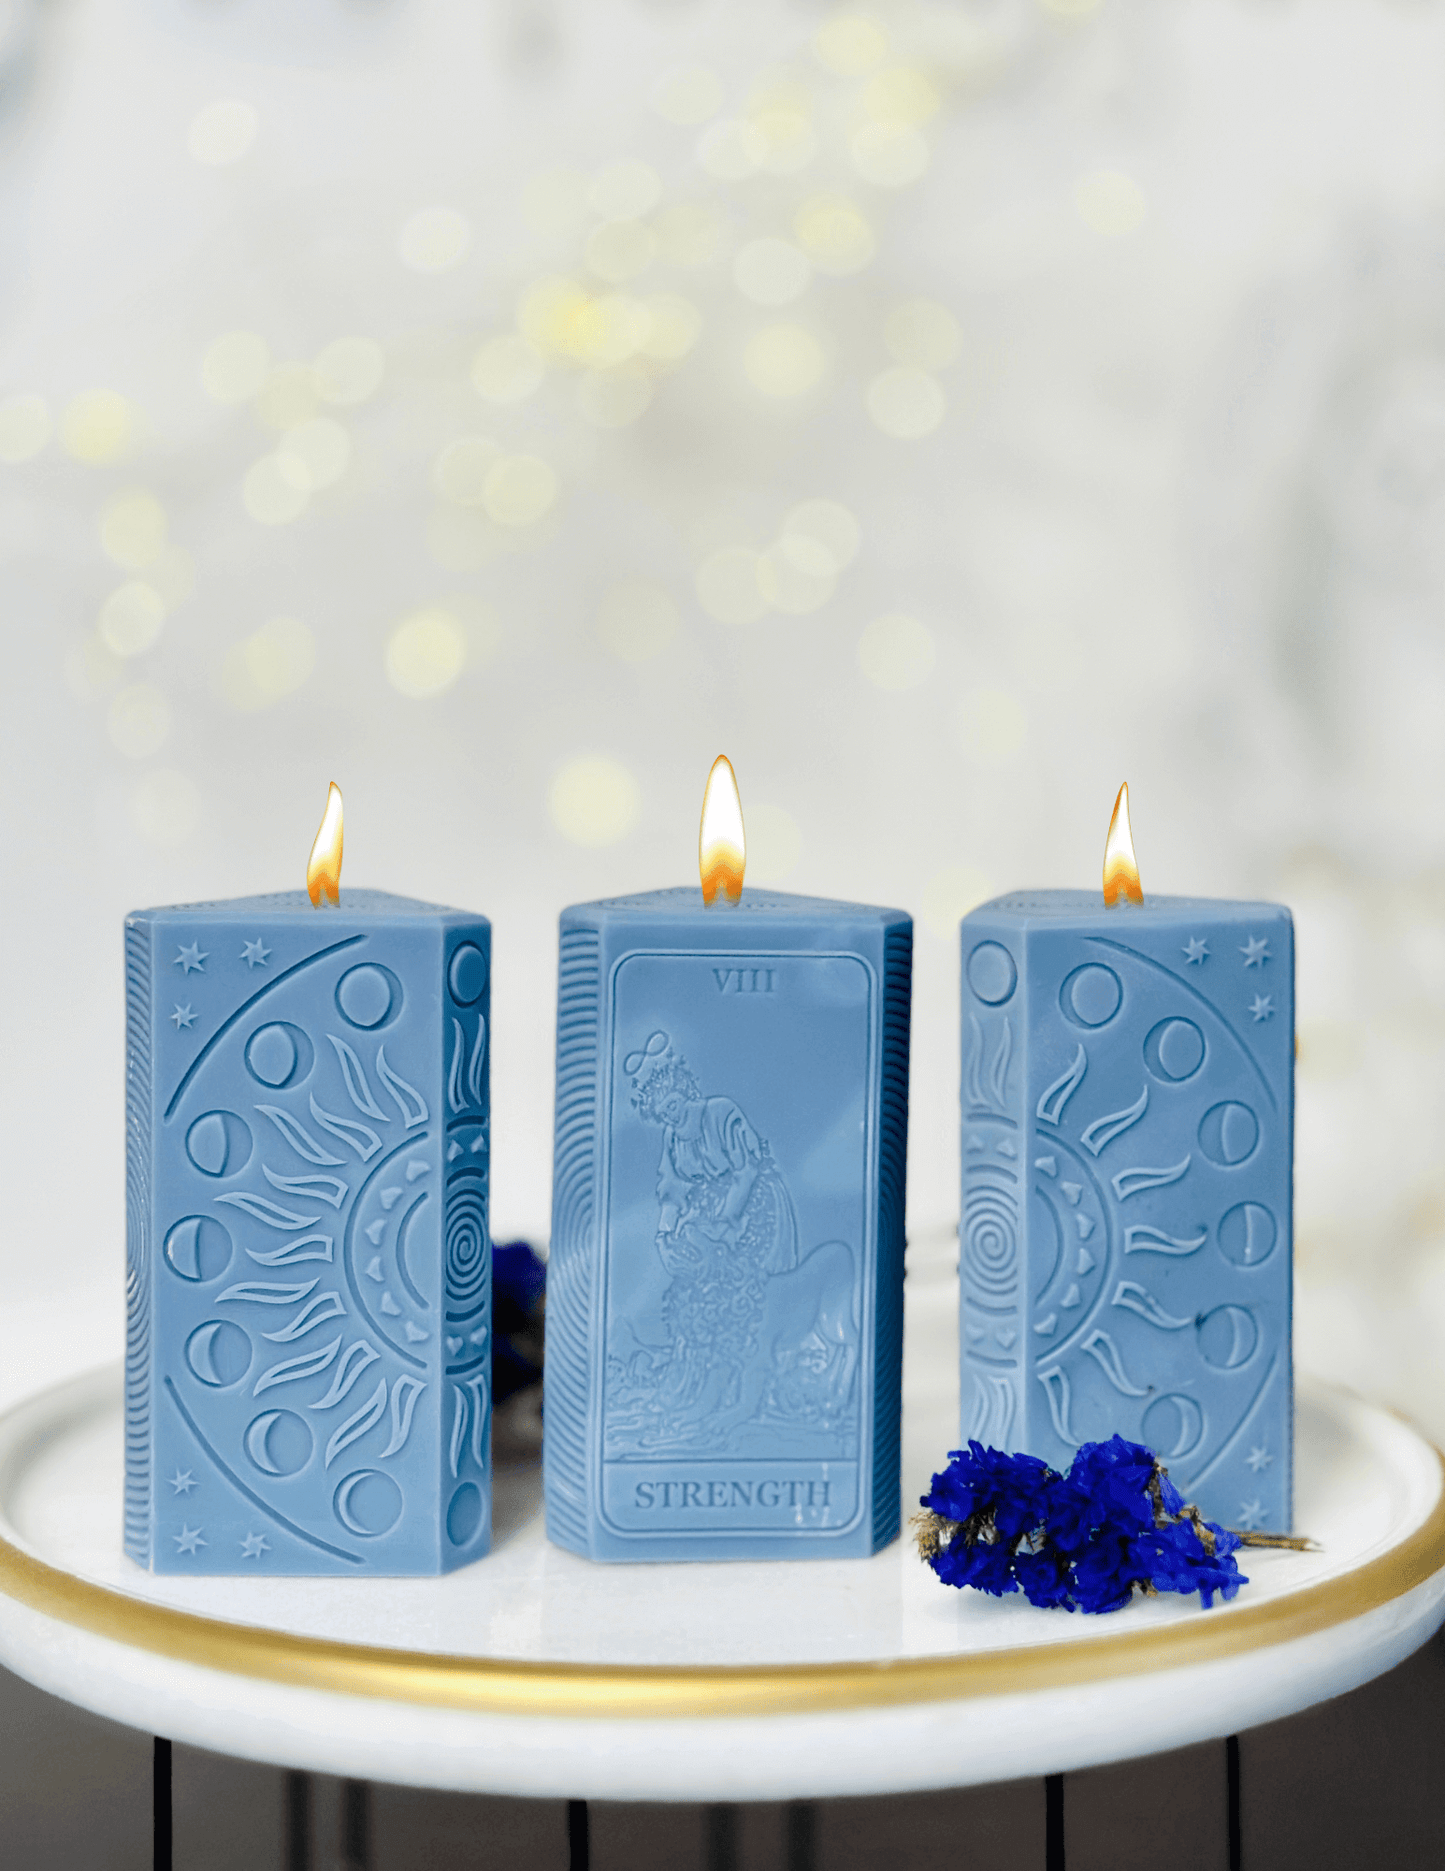 Tarot card and moon phases candle mold, Silicone candle mold